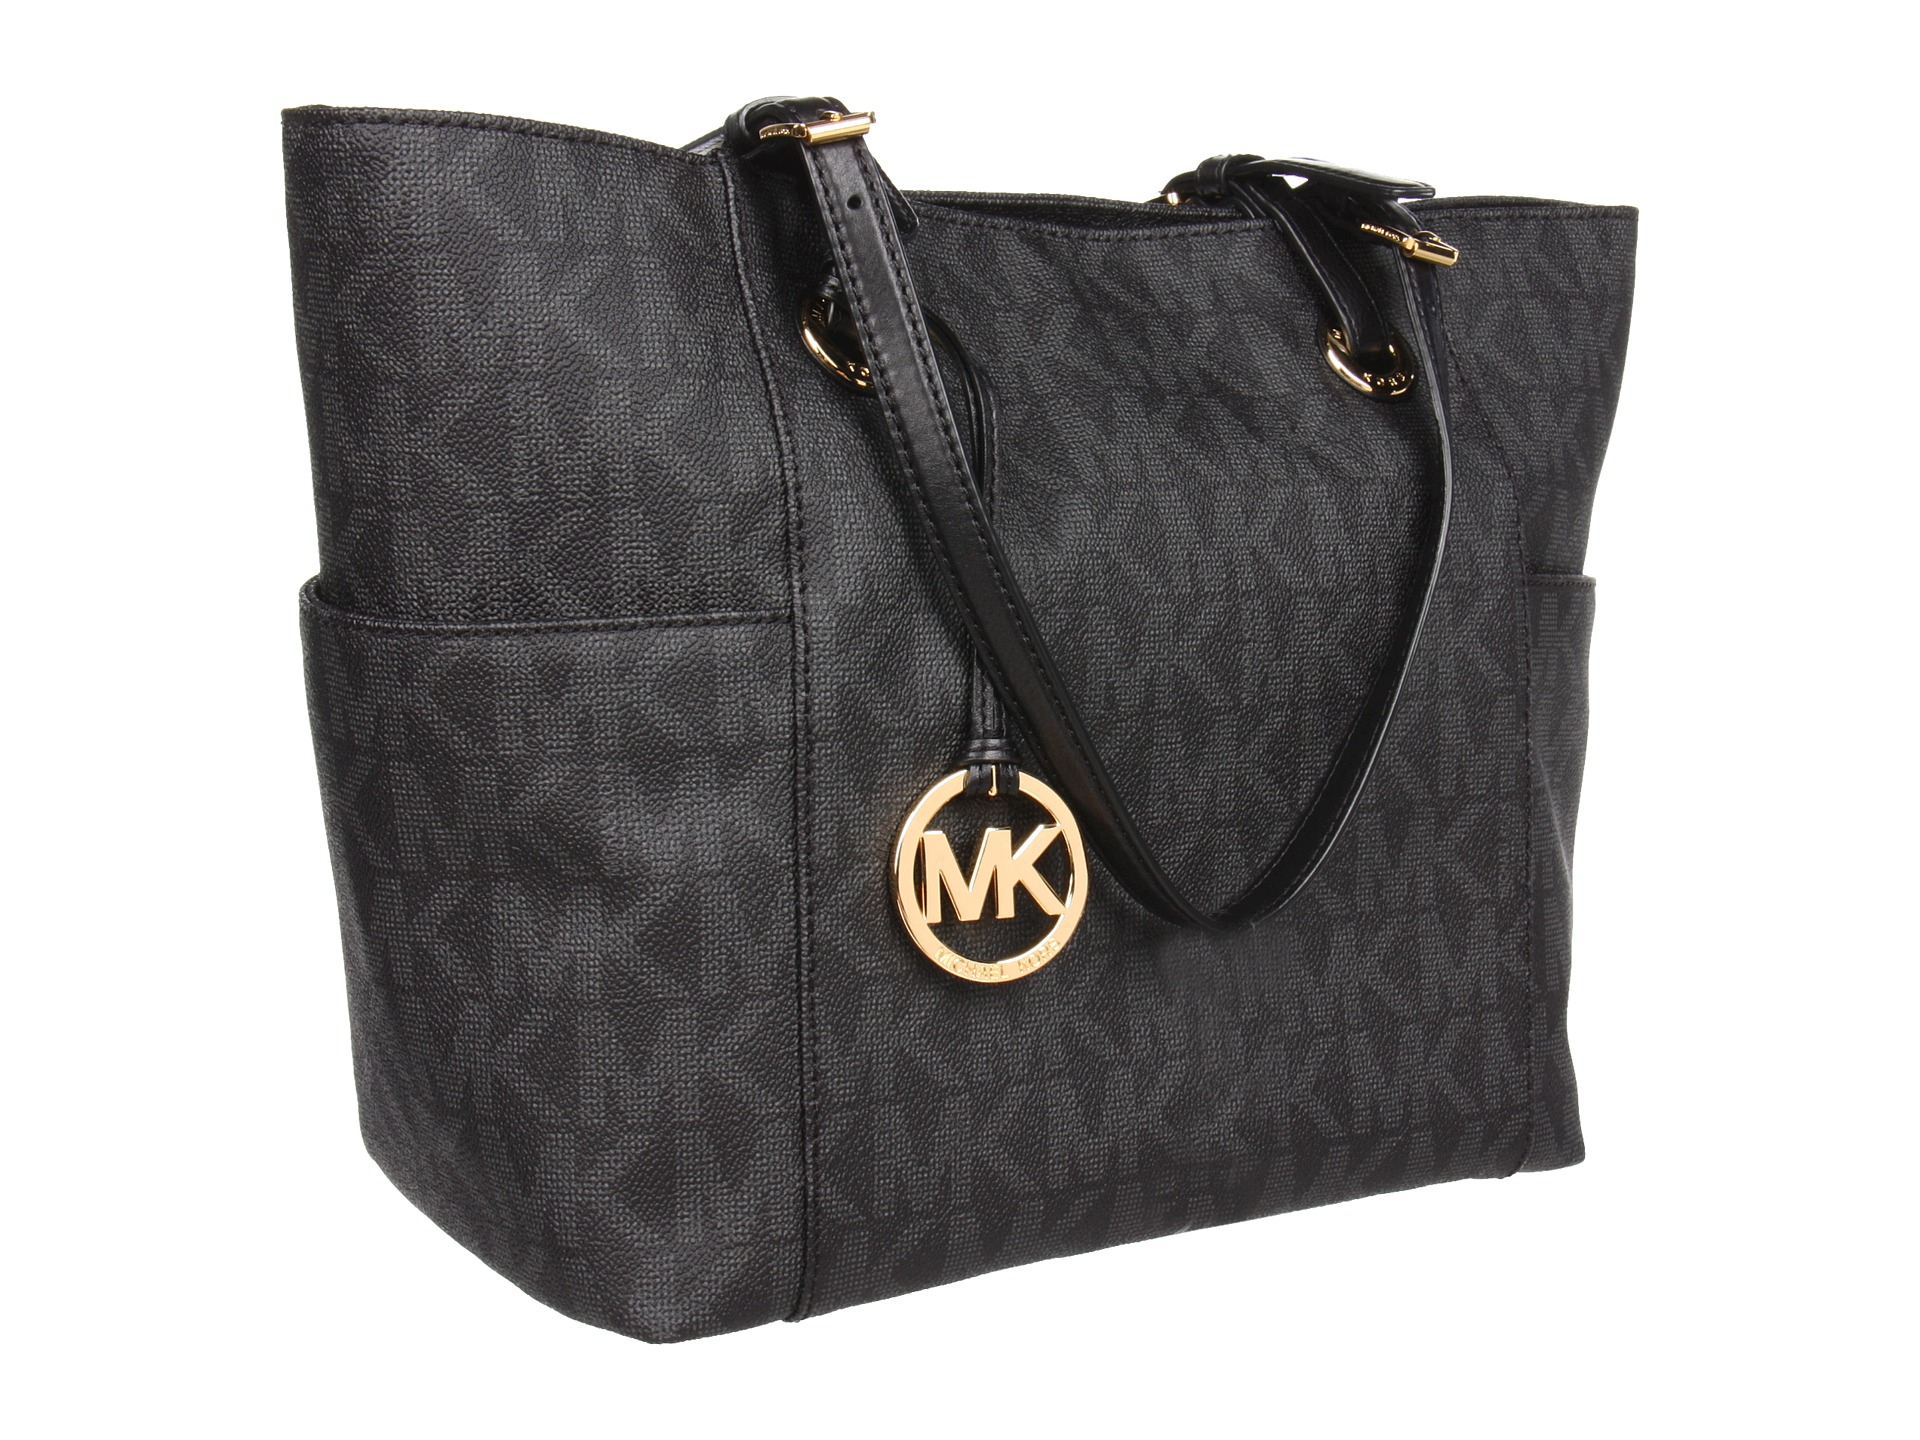 Black Michael Kors Purse With Mk Logo | Literacy Ontario Central South